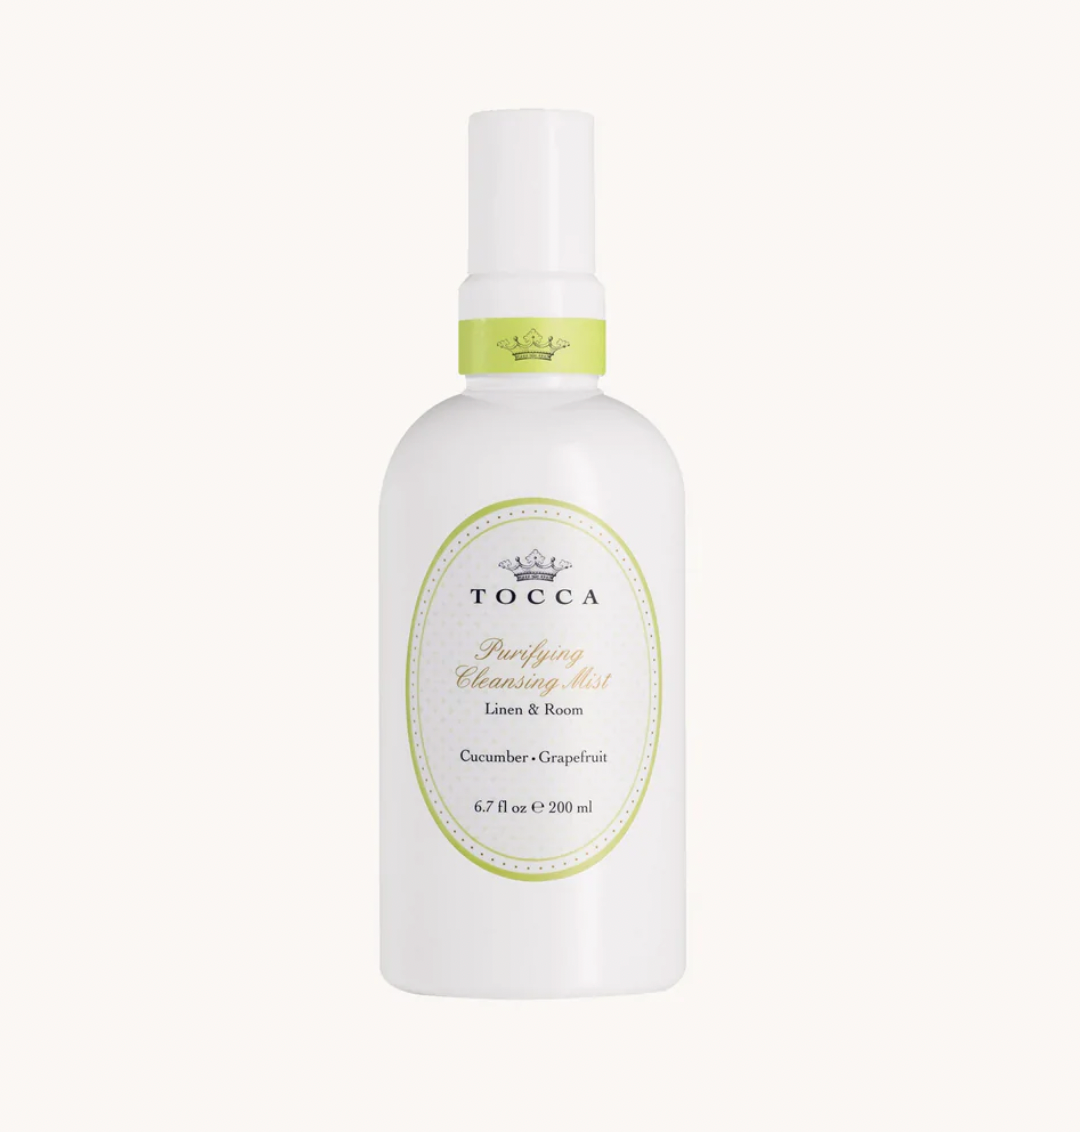 Tocca Purifying Cleansing Mist